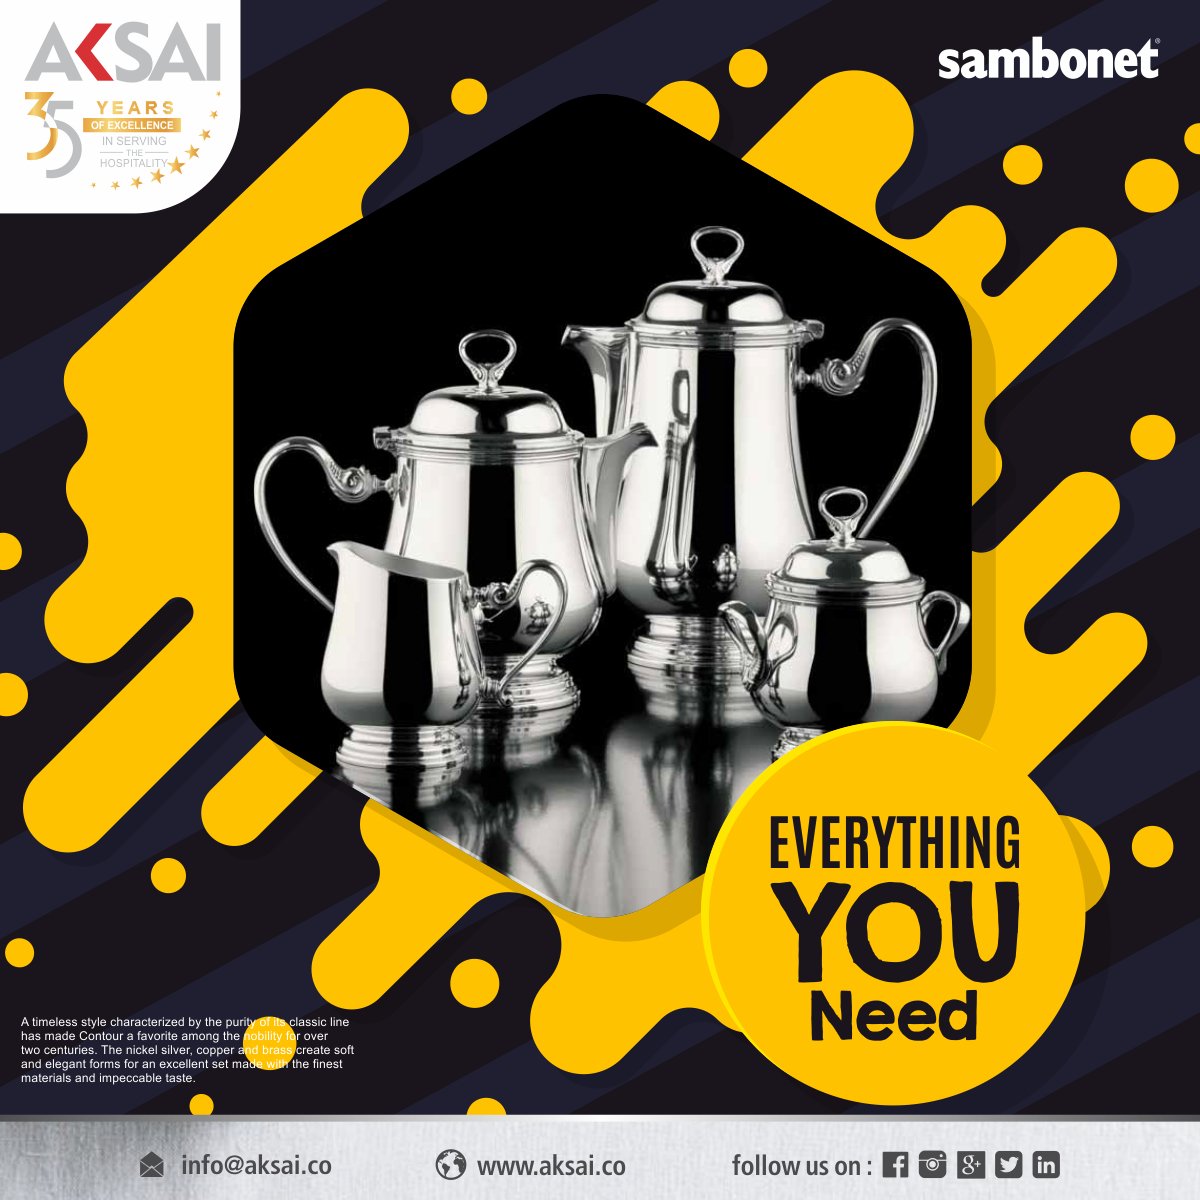 Sambonet : serving Italian excellence since 1856
#tuesday #aksaicreations #aksai #luxury #style #niche #35yearsofexcellence #Itlay #flatware #tableandservice #kitchen #Homebar #HomeDecor #staytuned